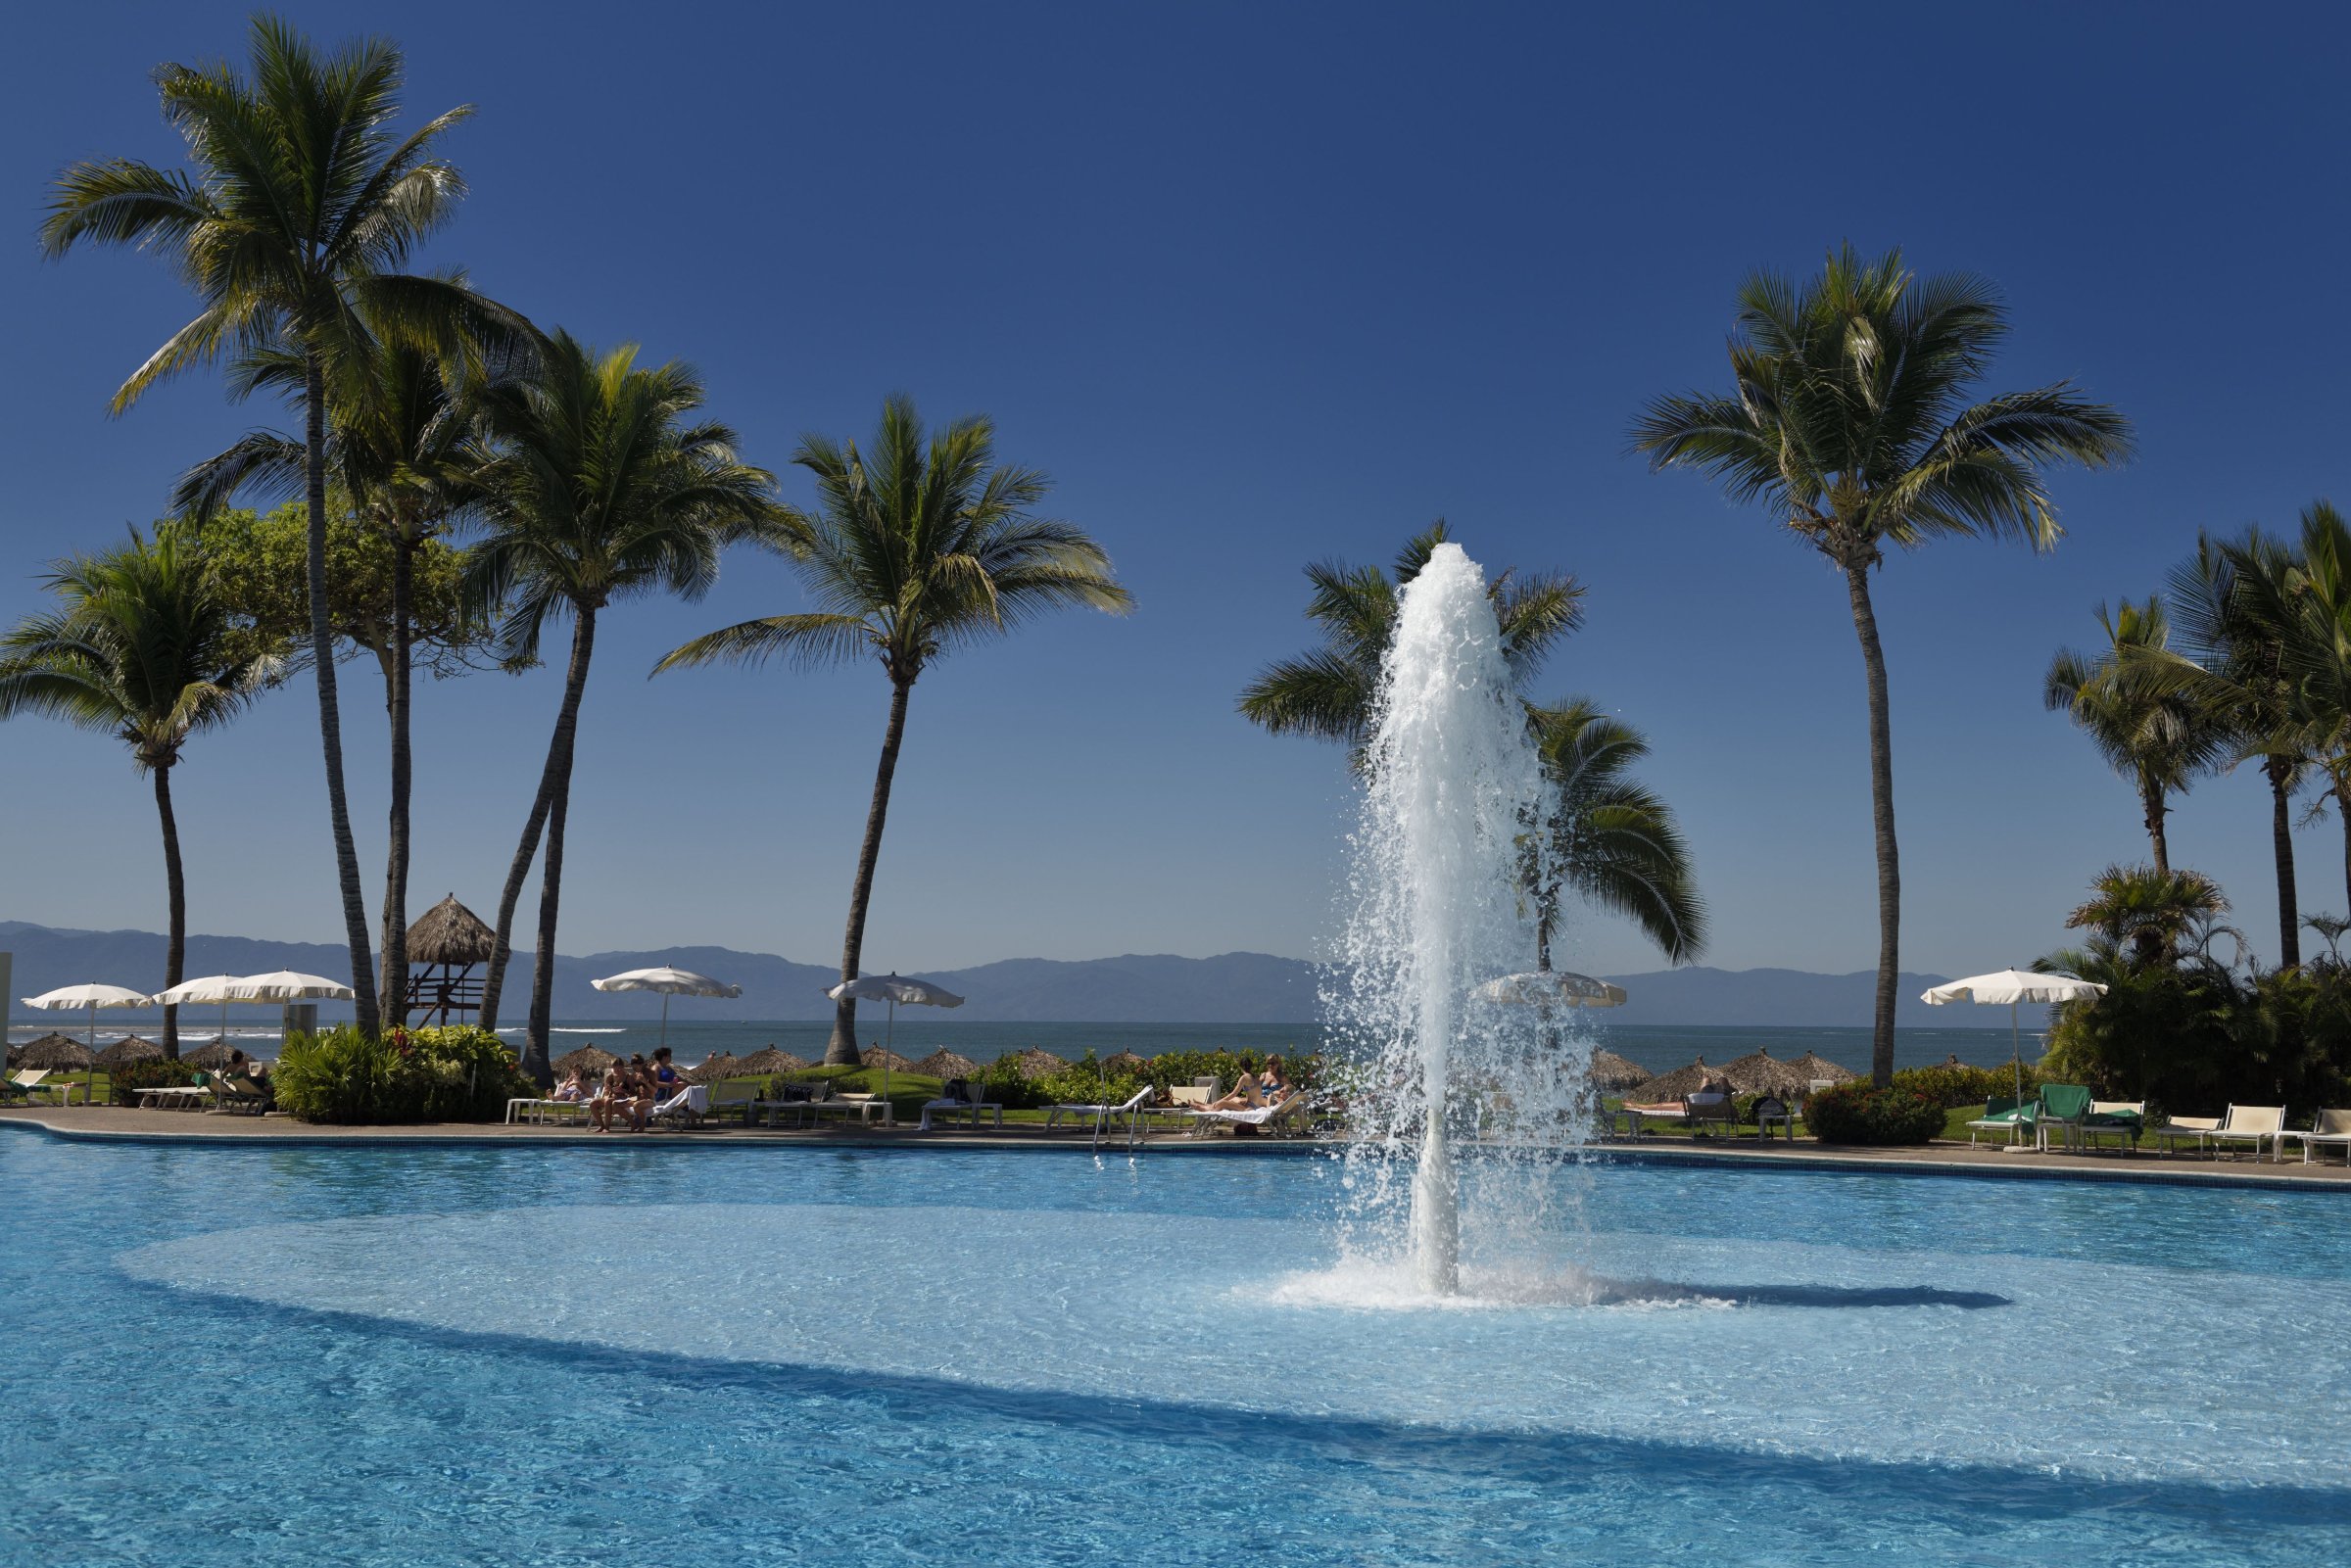 Pool with fountain at Nuevo Vallarta Mexico with Palm trees and vacationers